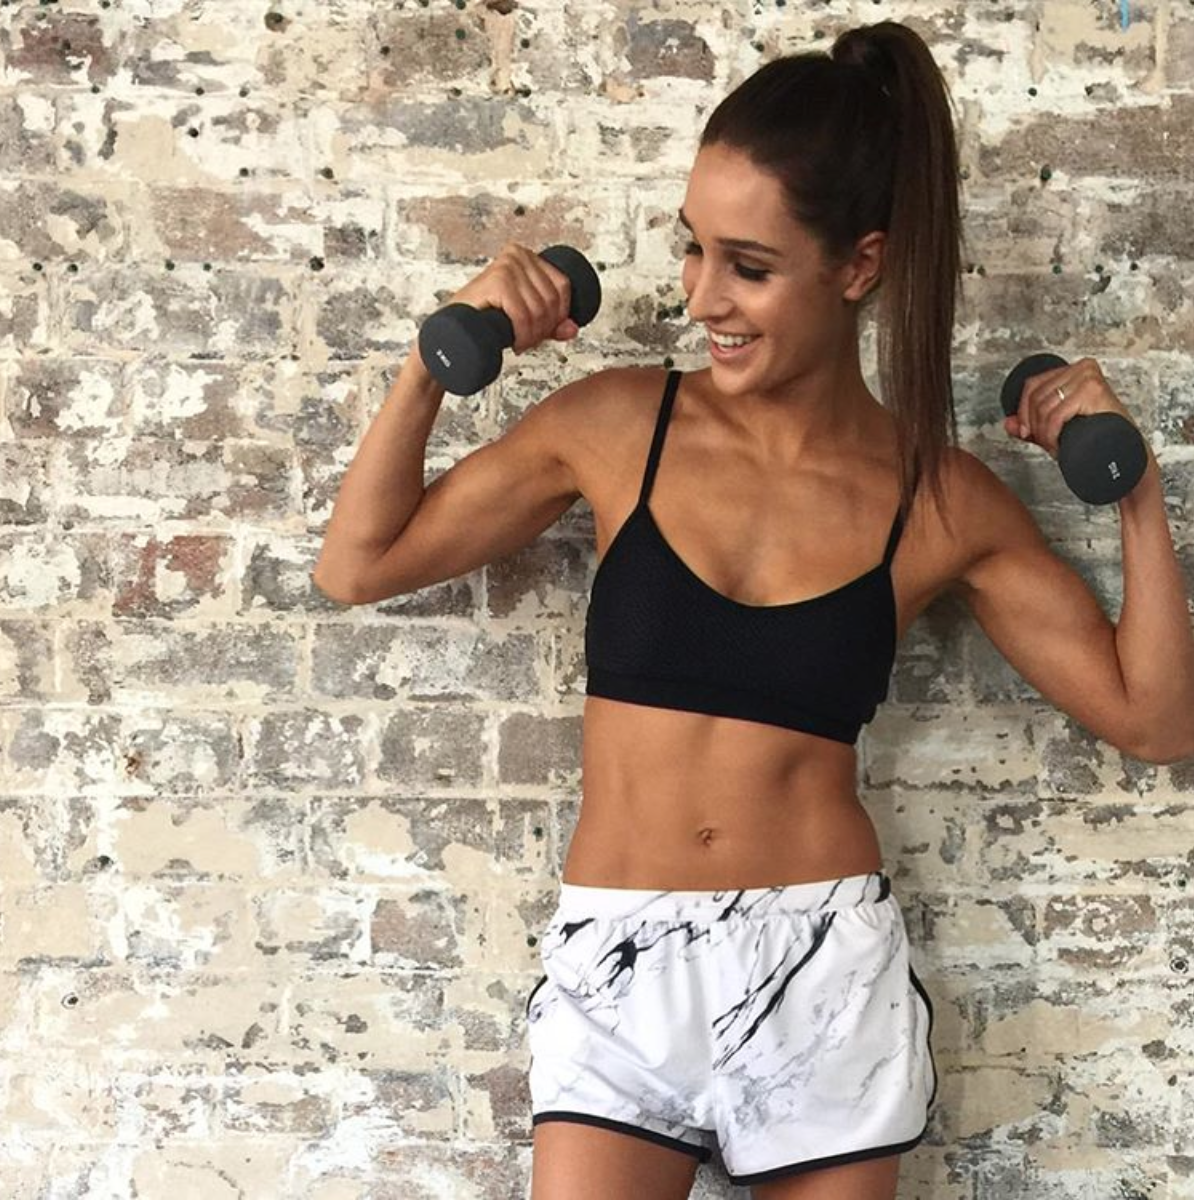 Why I Cancelled My Subscription to Kayla Itsines' Fitness App